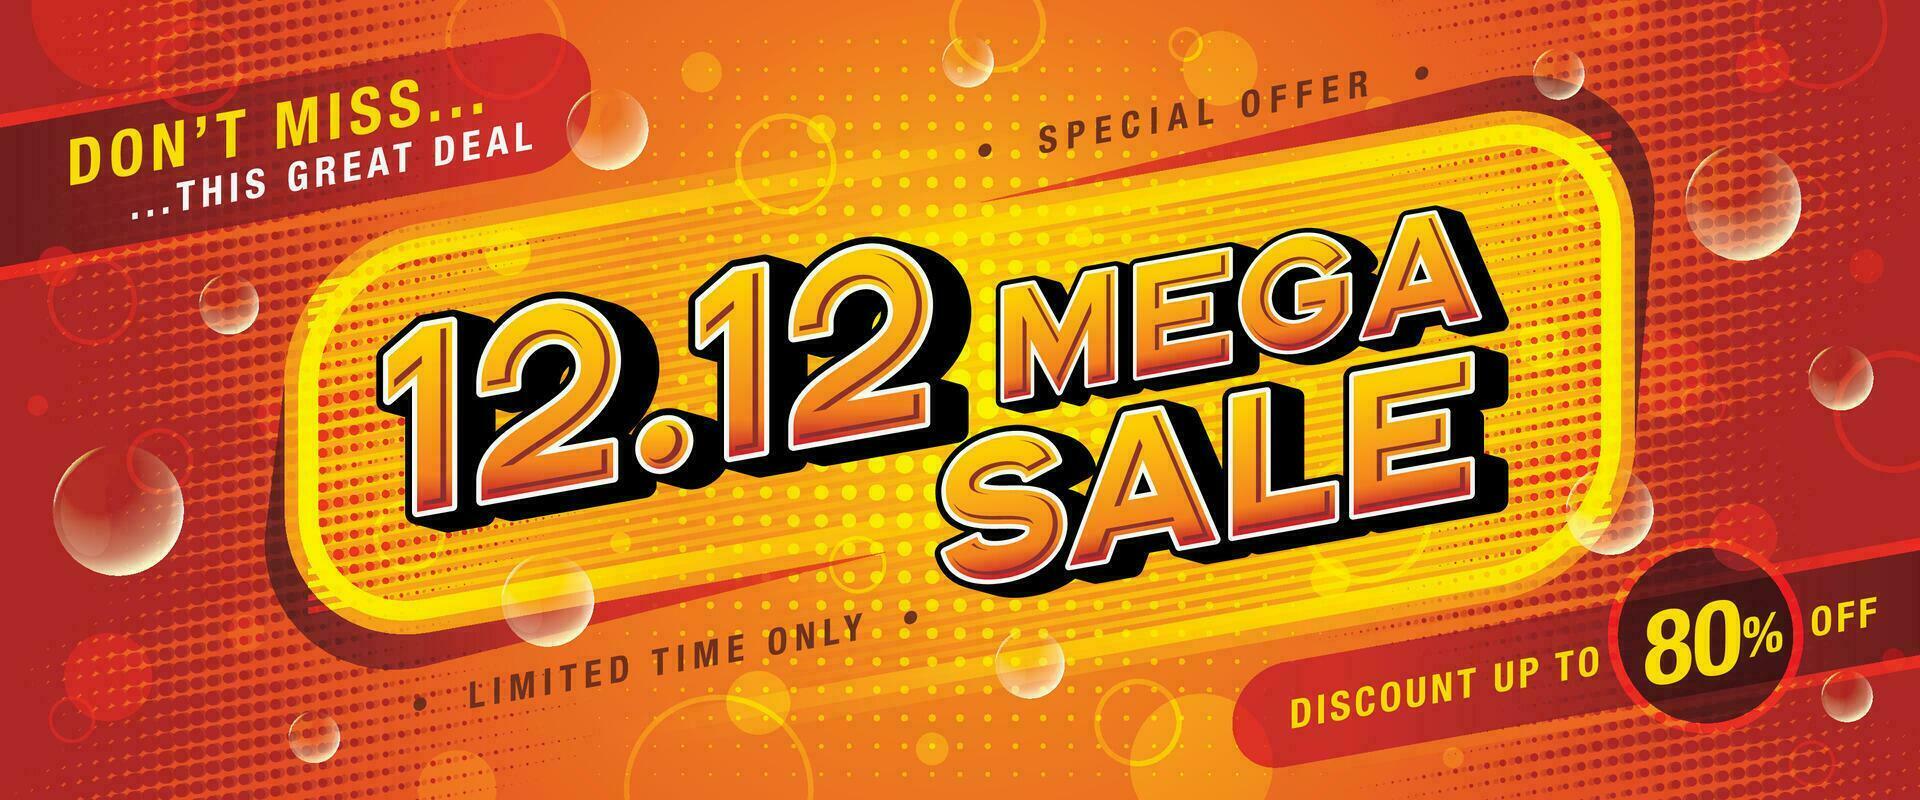 12.12 Shopping Day Mega Sale Banner Template design special offer discount vector